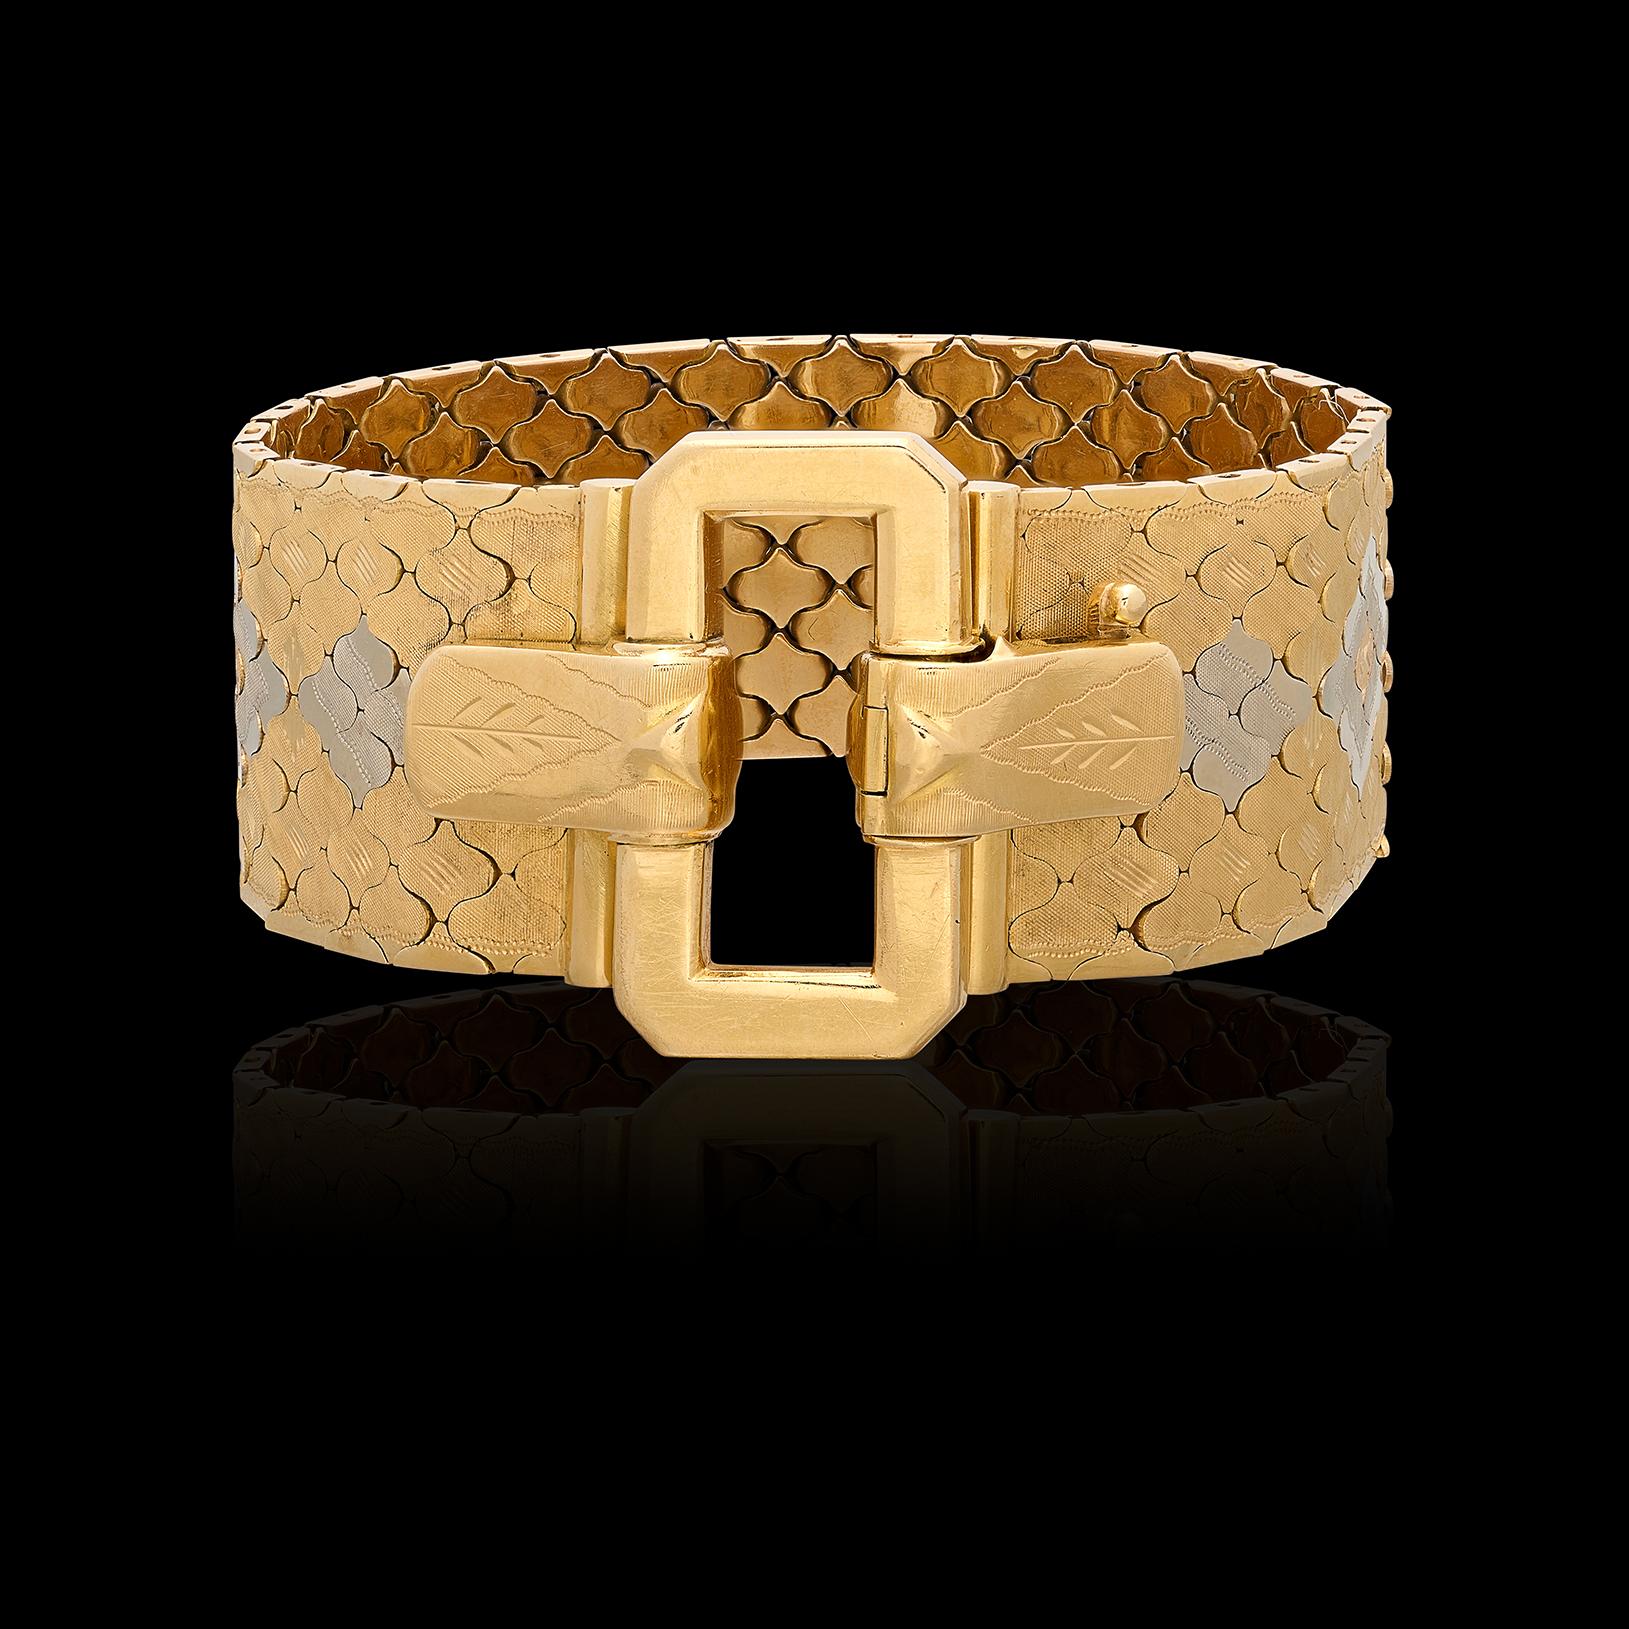 An Art Deco bracelet that is just as fashionable today as it was when it was created. This 18 karat stunner measures 7